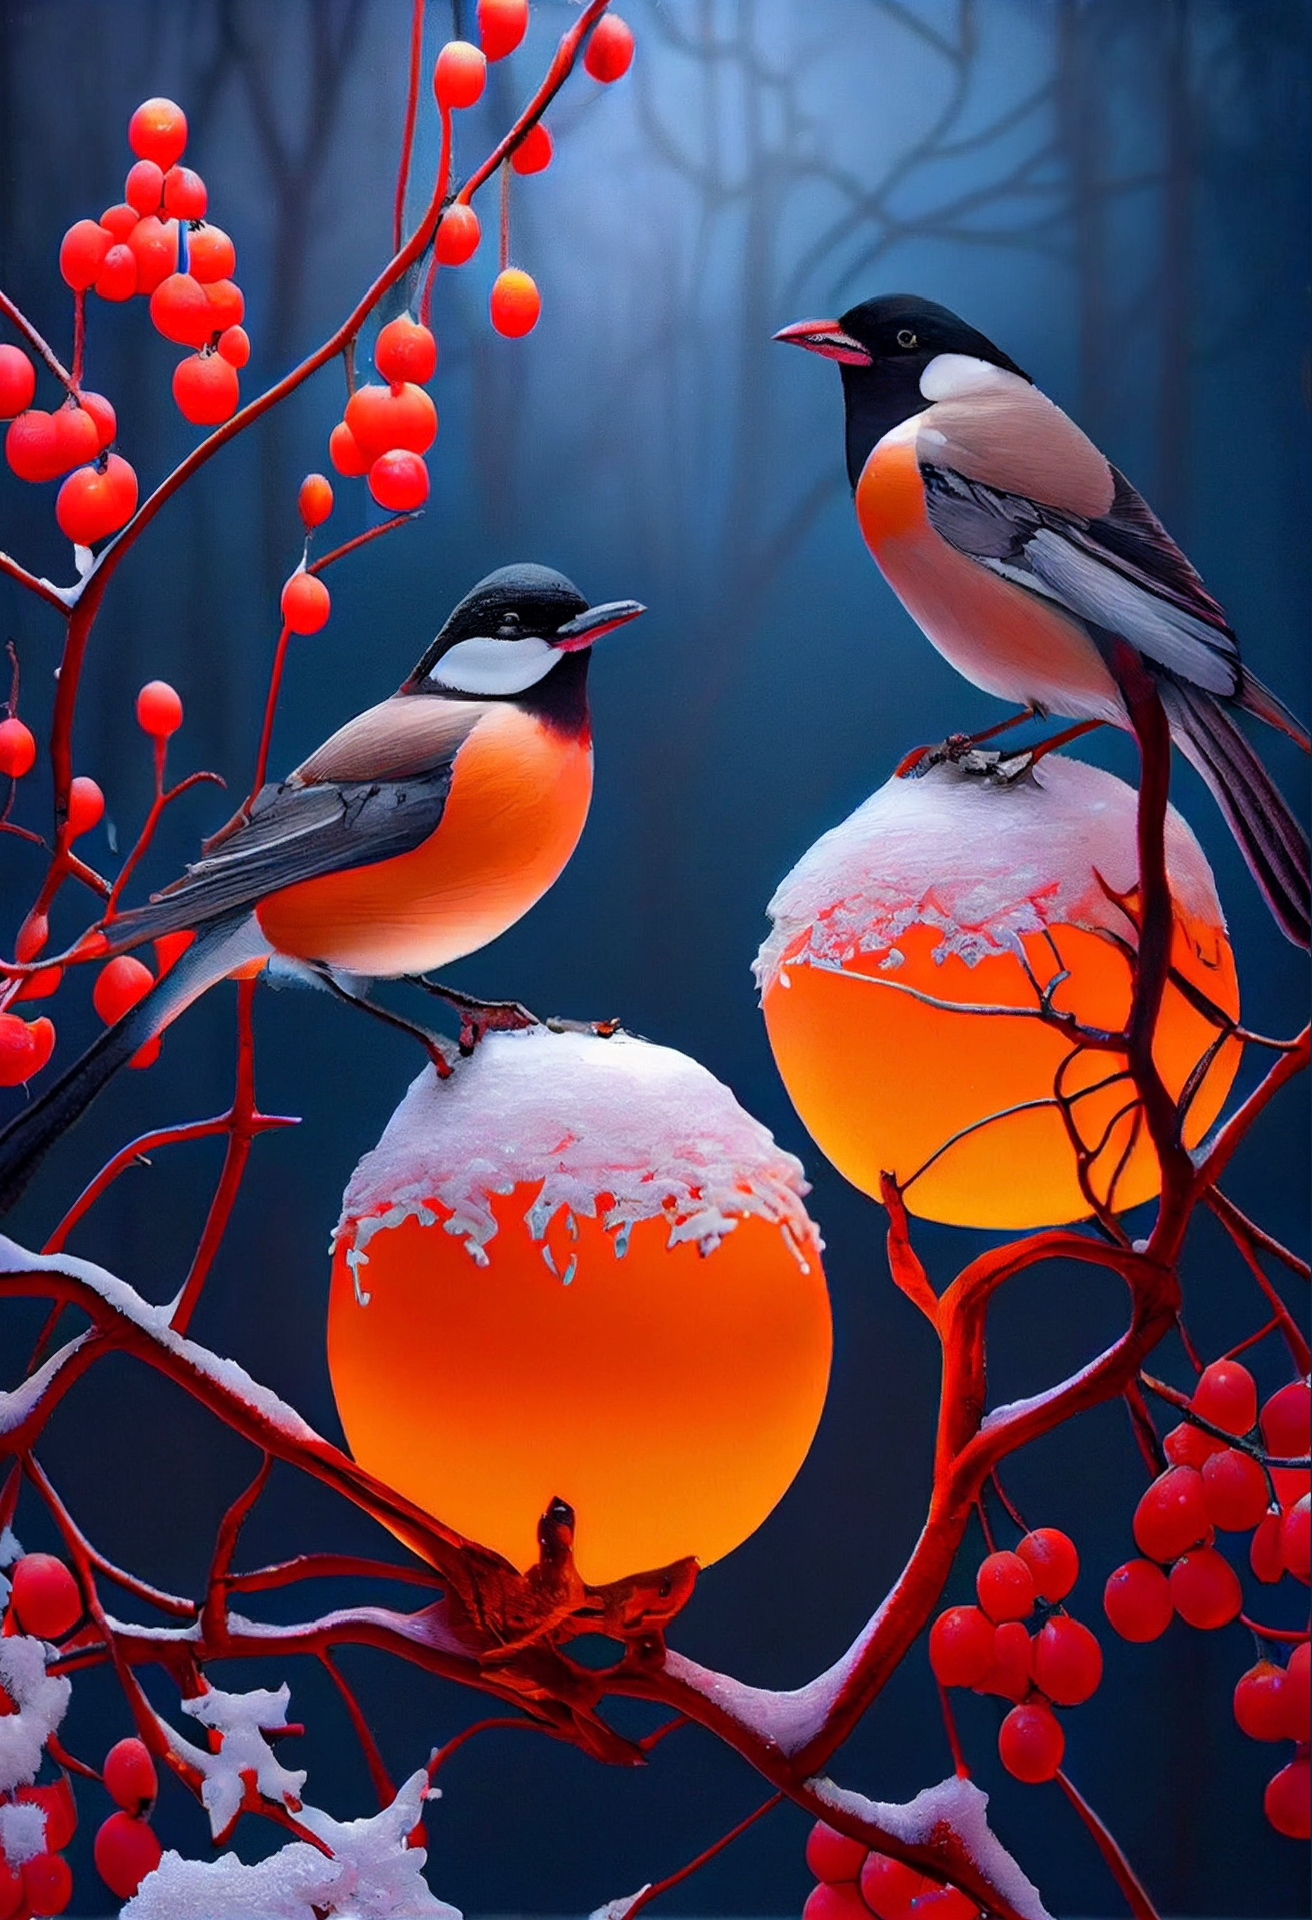 Diamond Painting - A Beautiful and Delicate Bird